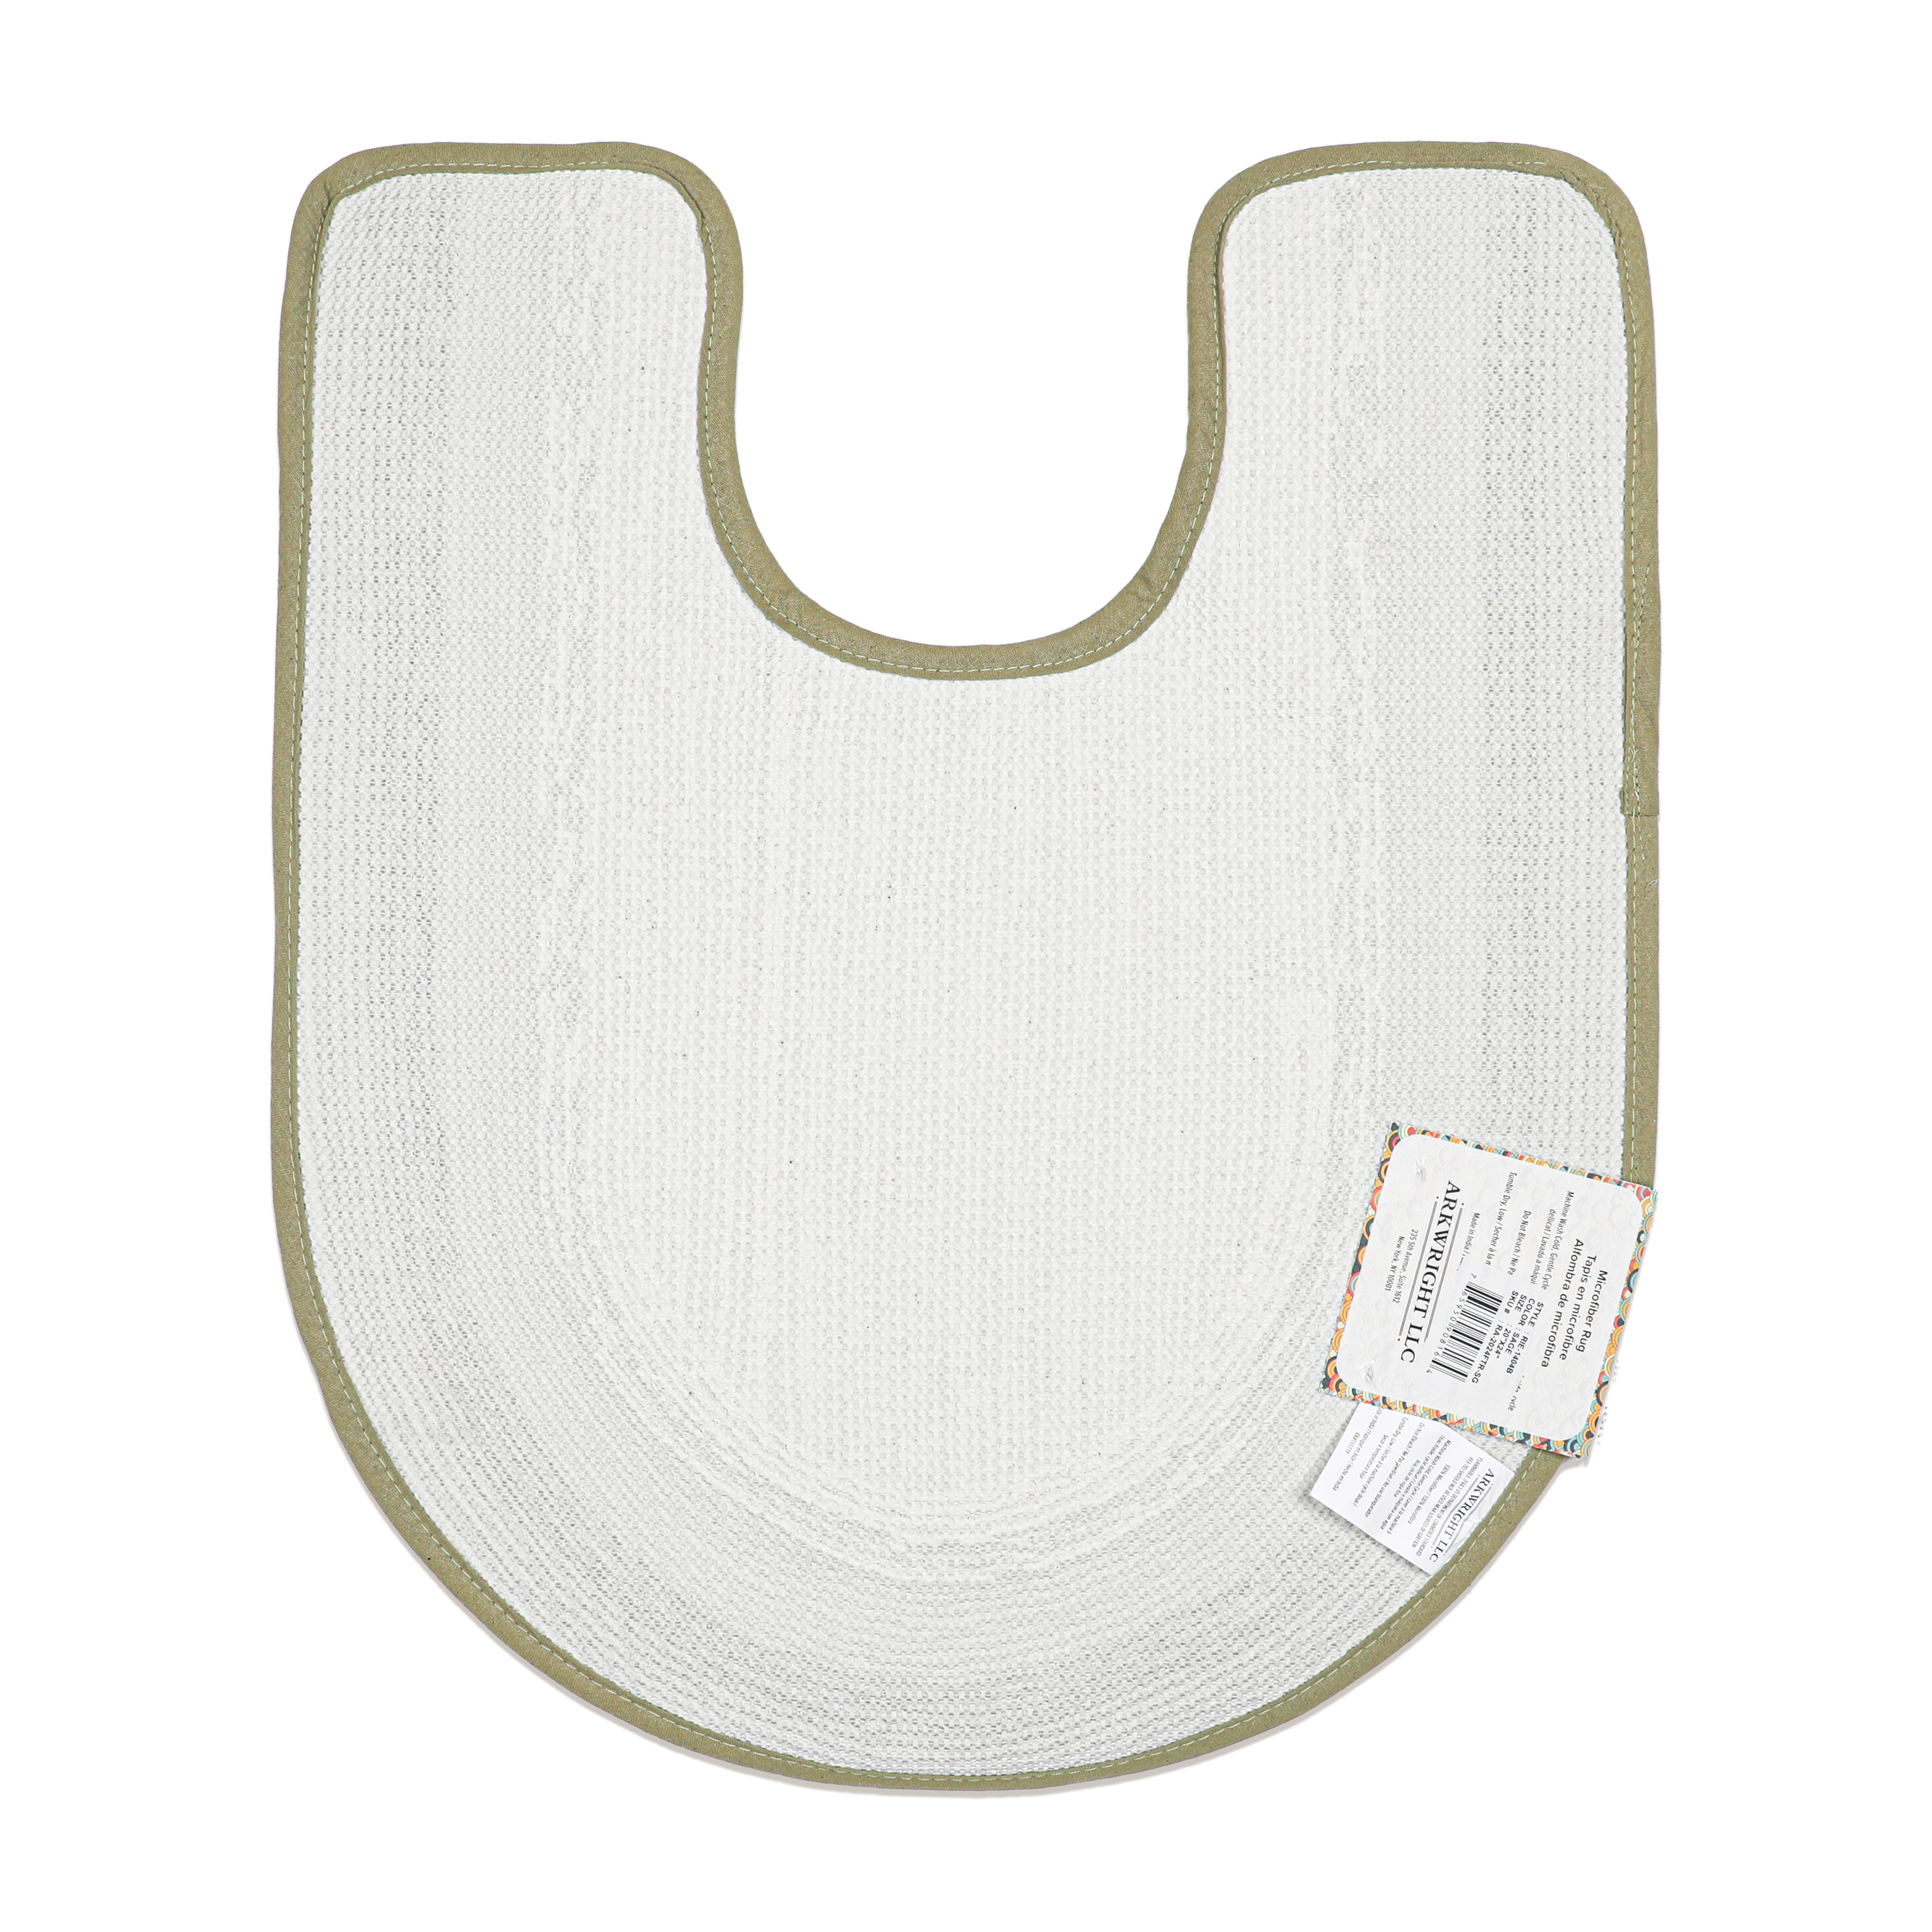 Arkwright Fast Track Toilet Contour Rug, 20x24, Color Options, Microfiber Material - image 2 of 4